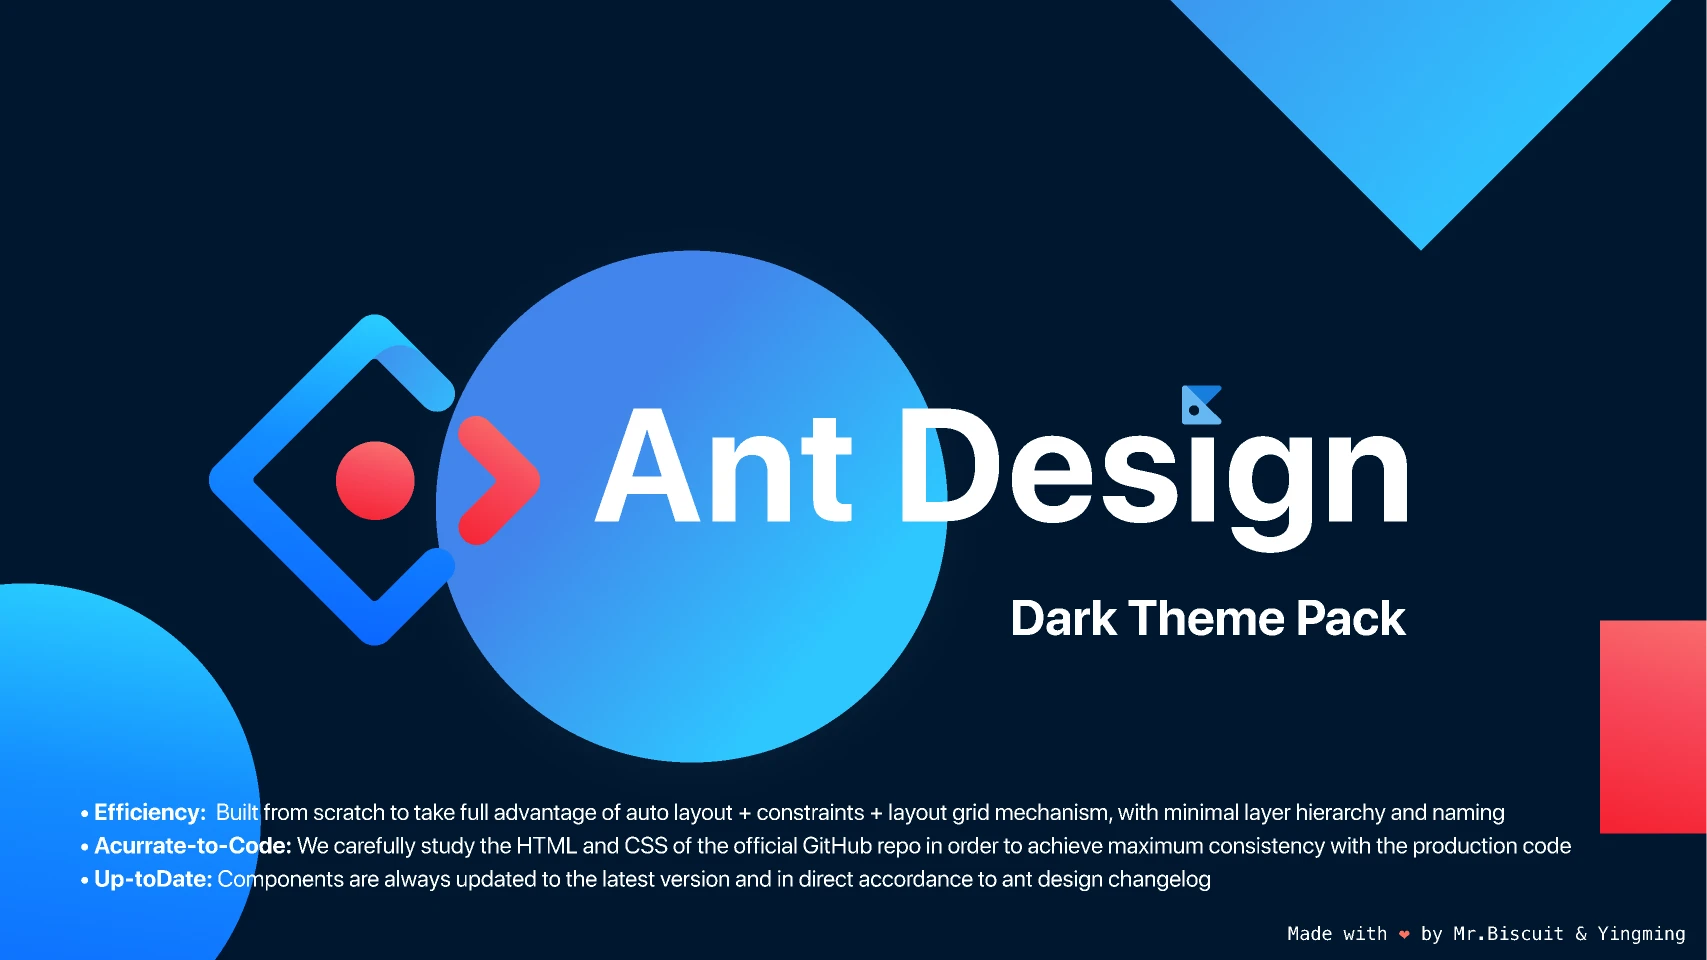 Ant Design Open Source Dark Theme Pack for Figma and Adobe XD